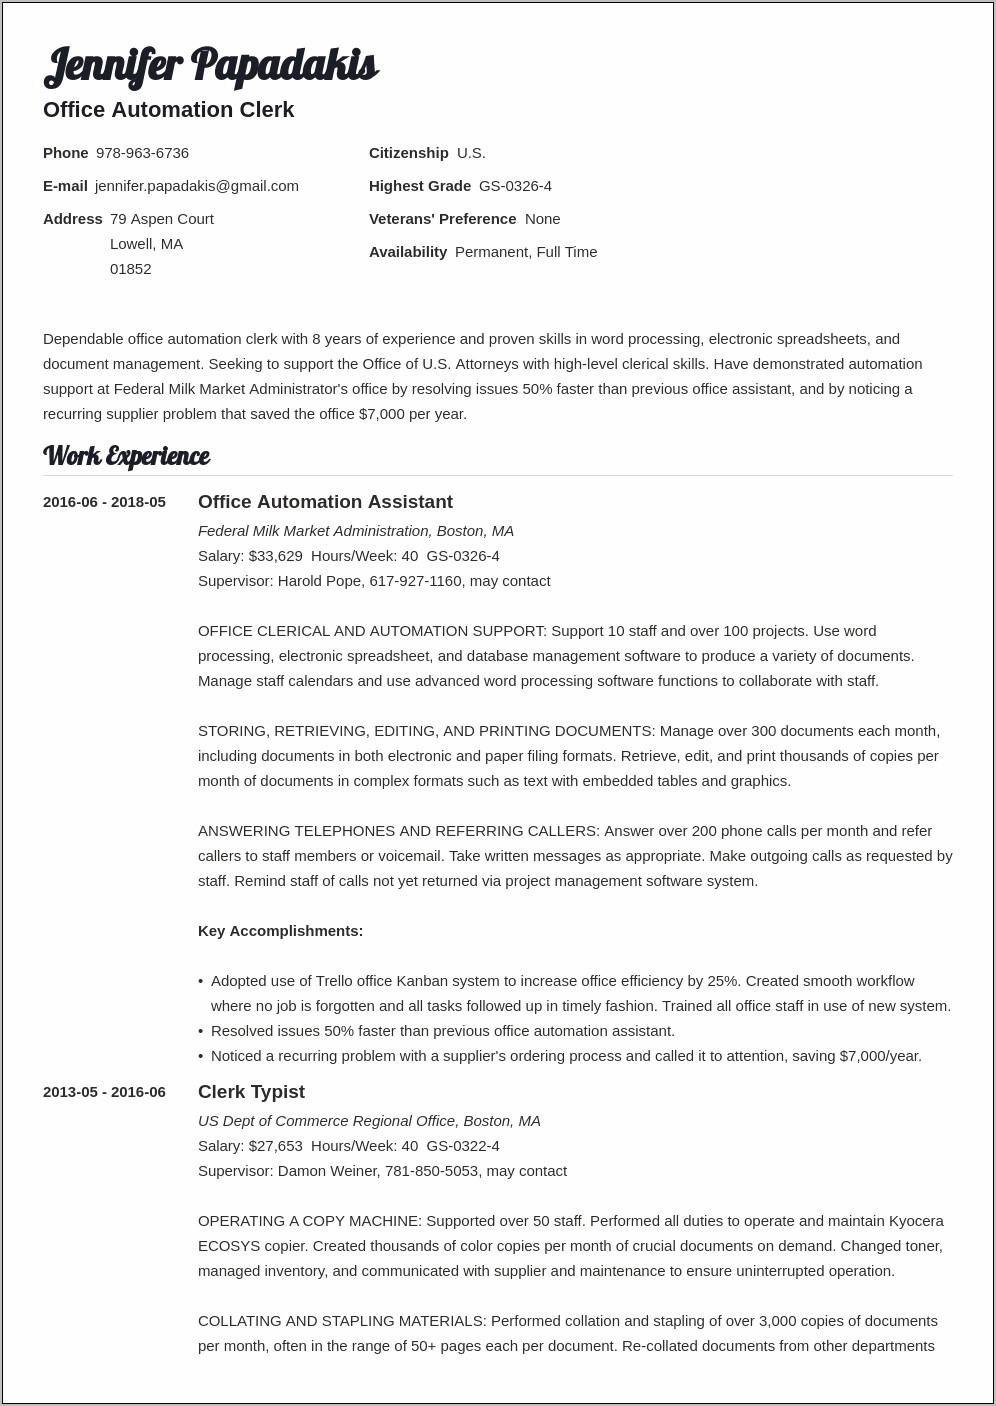 Example Resume For Federal Employment